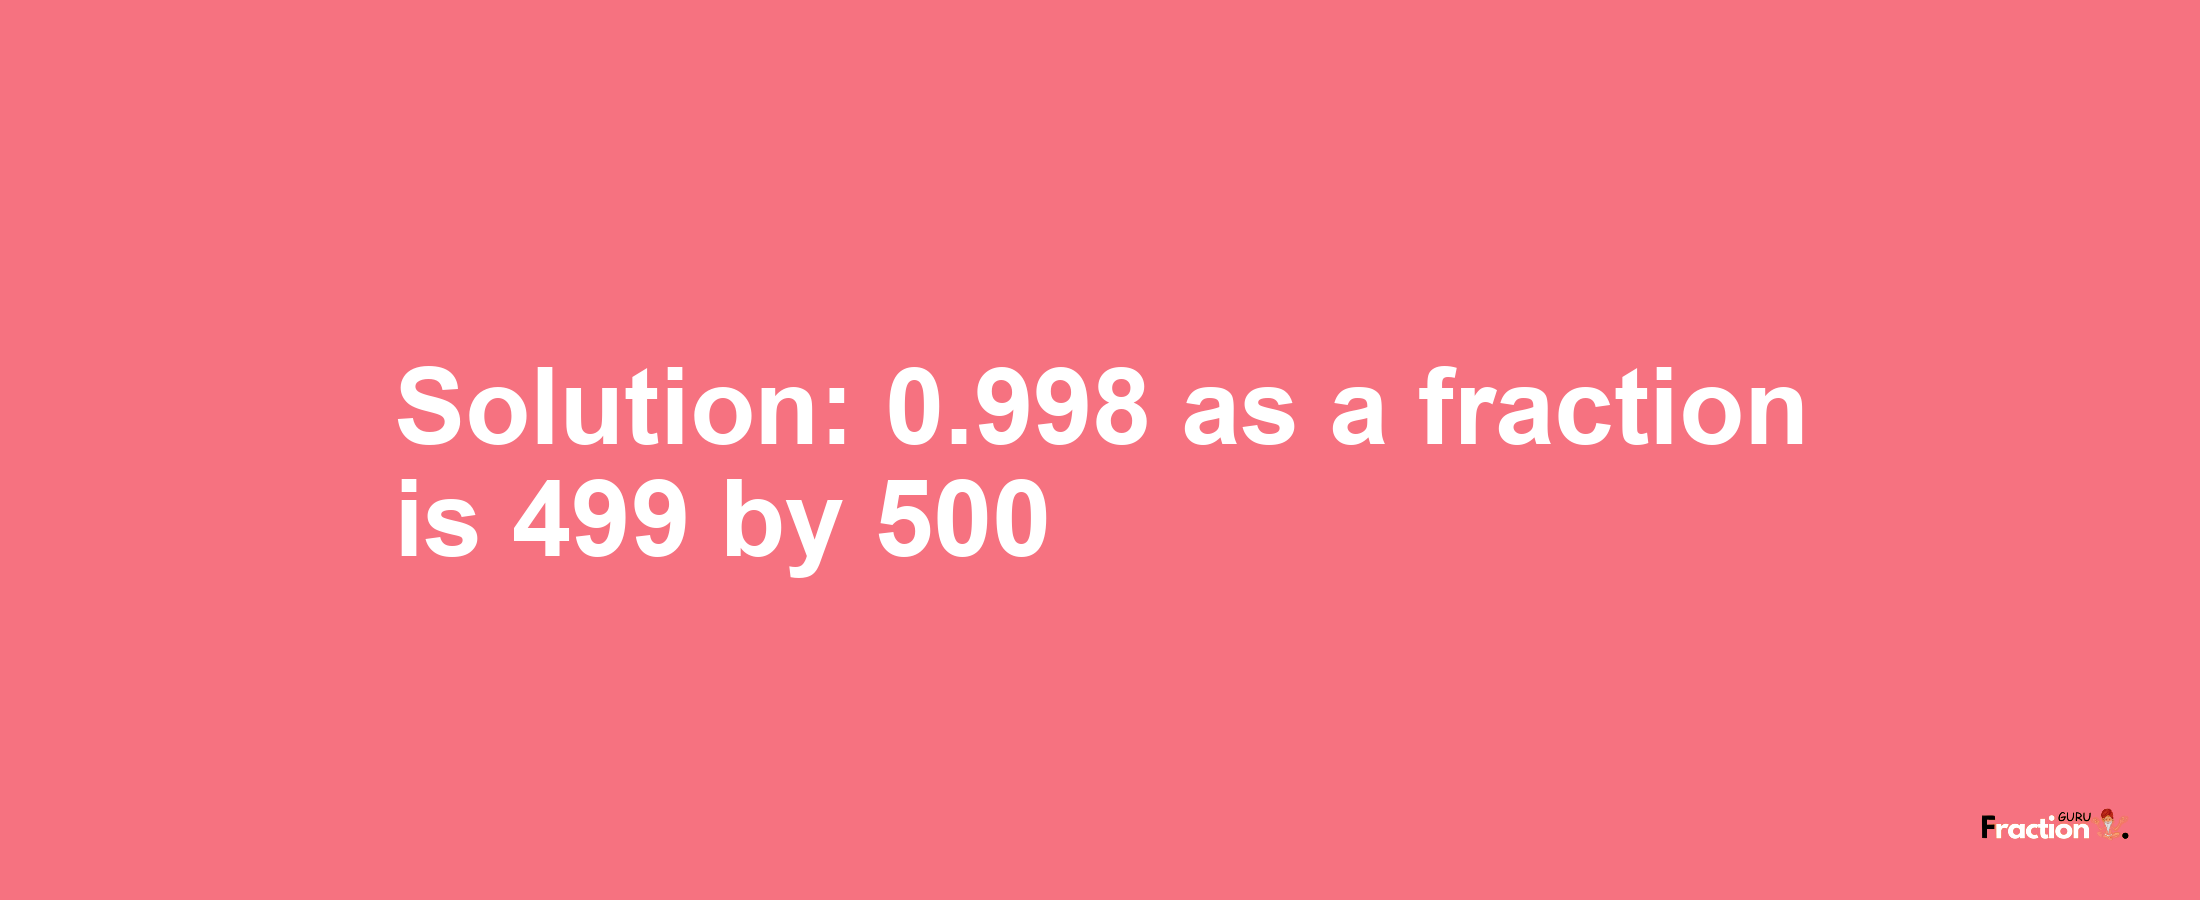 Solution:0.998 as a fraction is 499/500